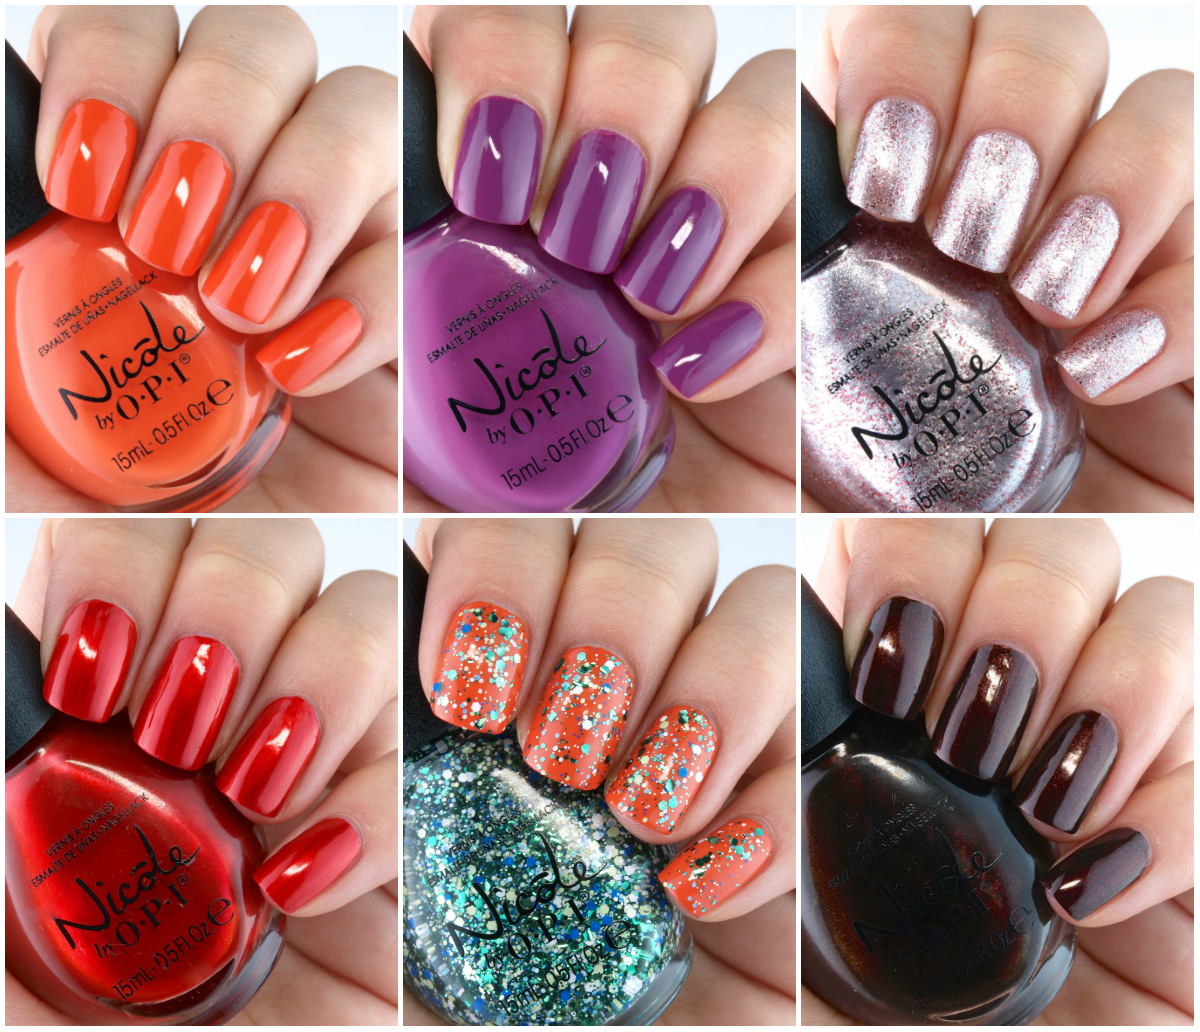 Nicole by OPI Coca Cola Collection Nail Polish: Review and Swatches ...